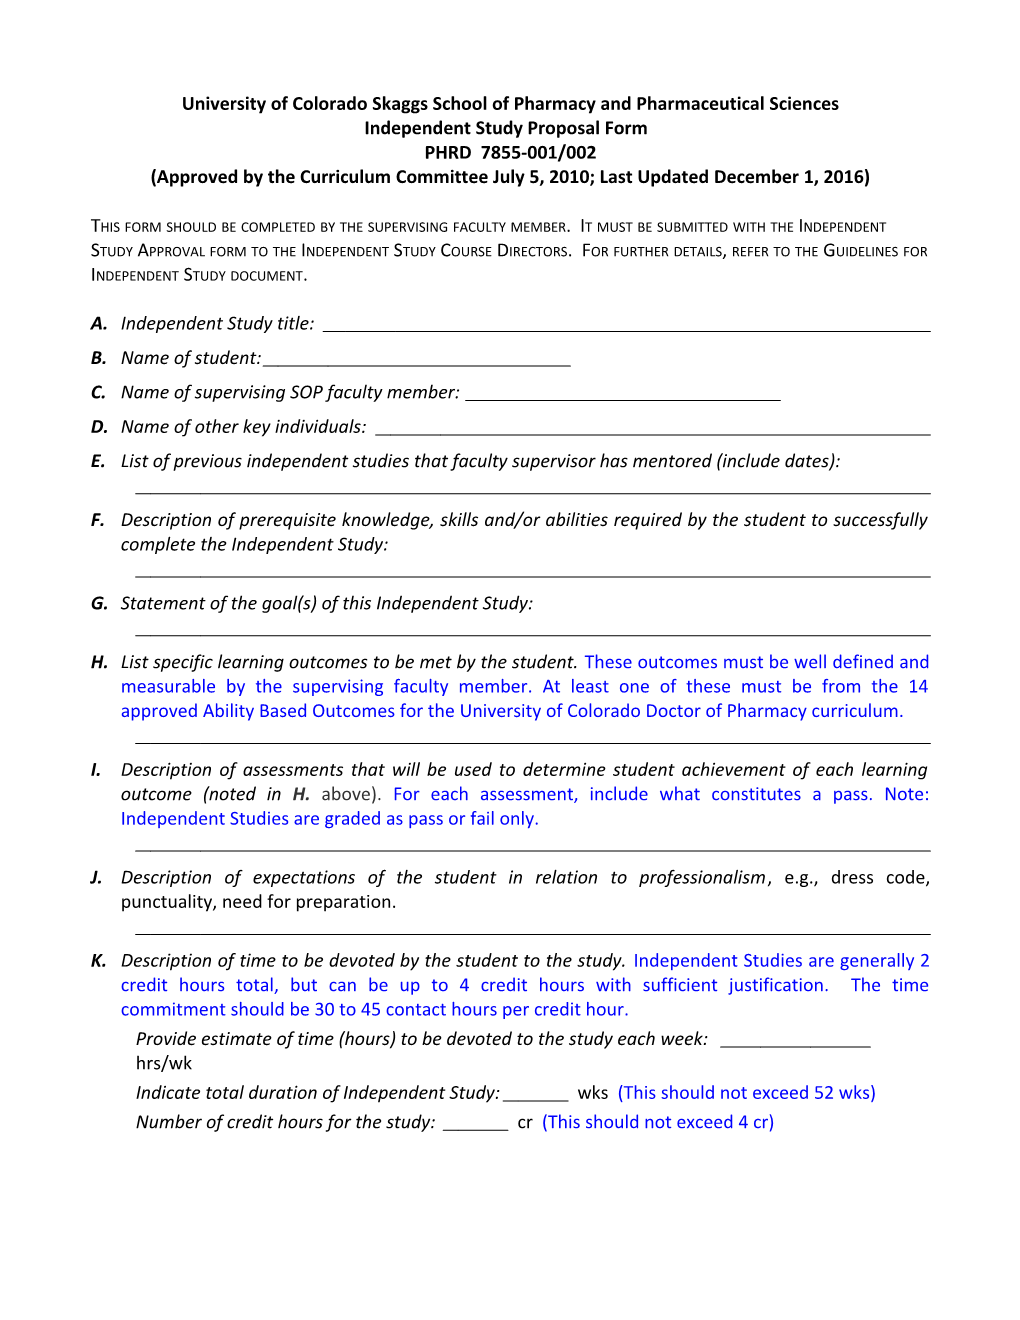 Research Elective Course Approval Form